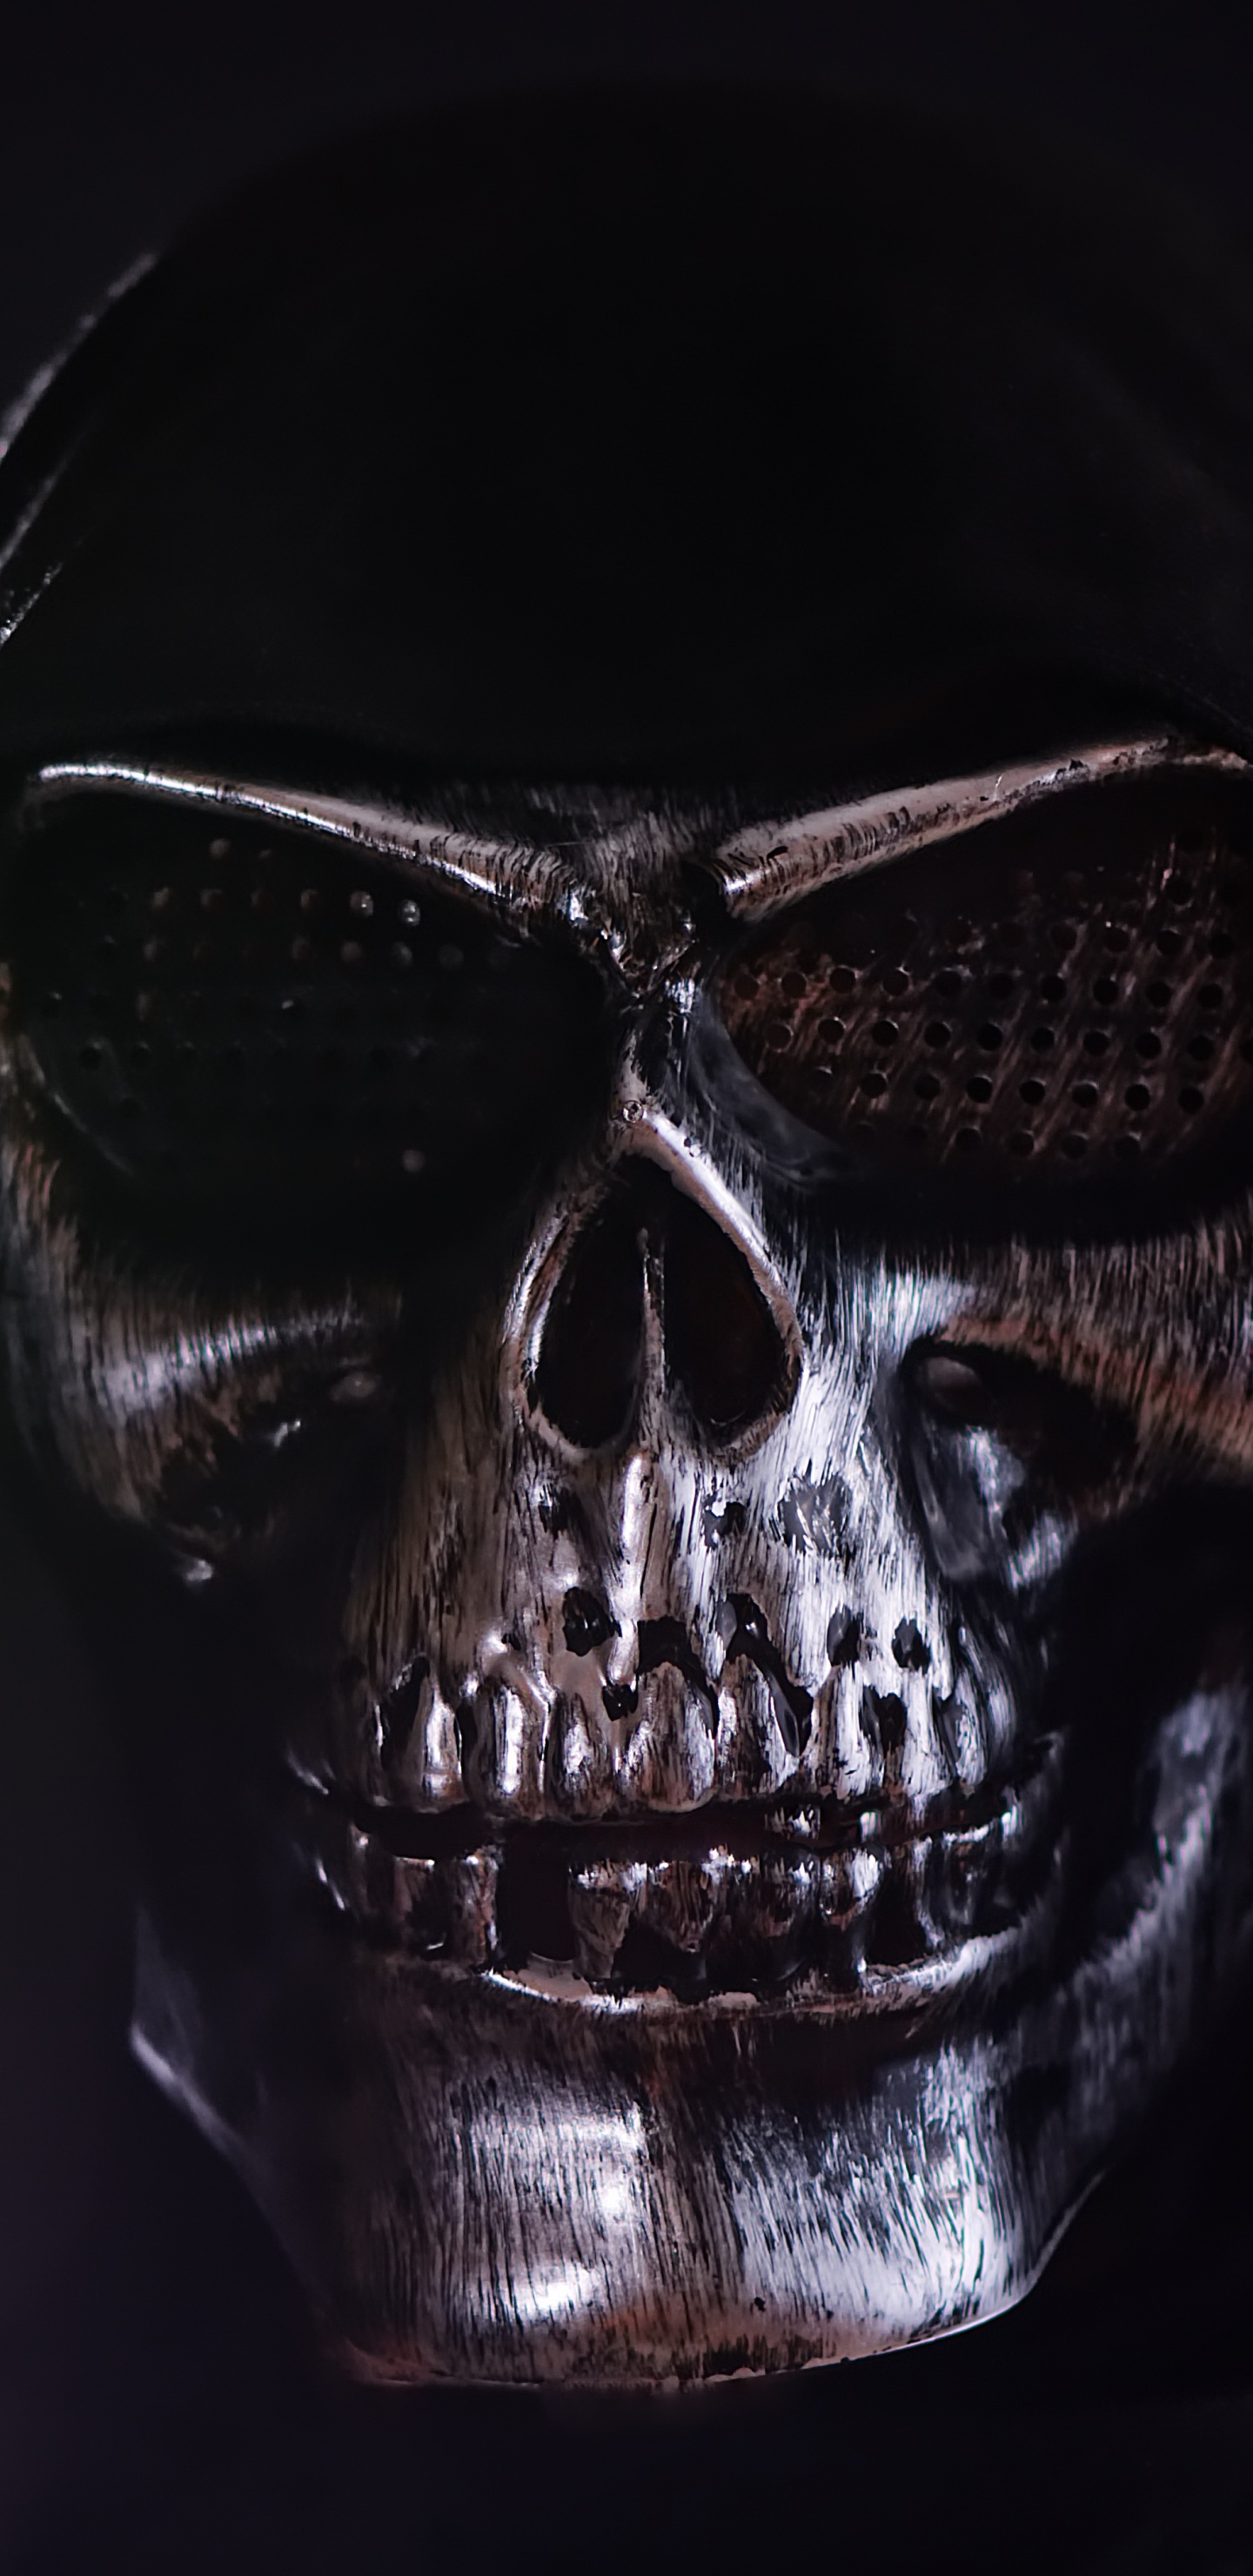 Black and Silver Skull Mask. Wallpaper in 1440x2960 Resolution